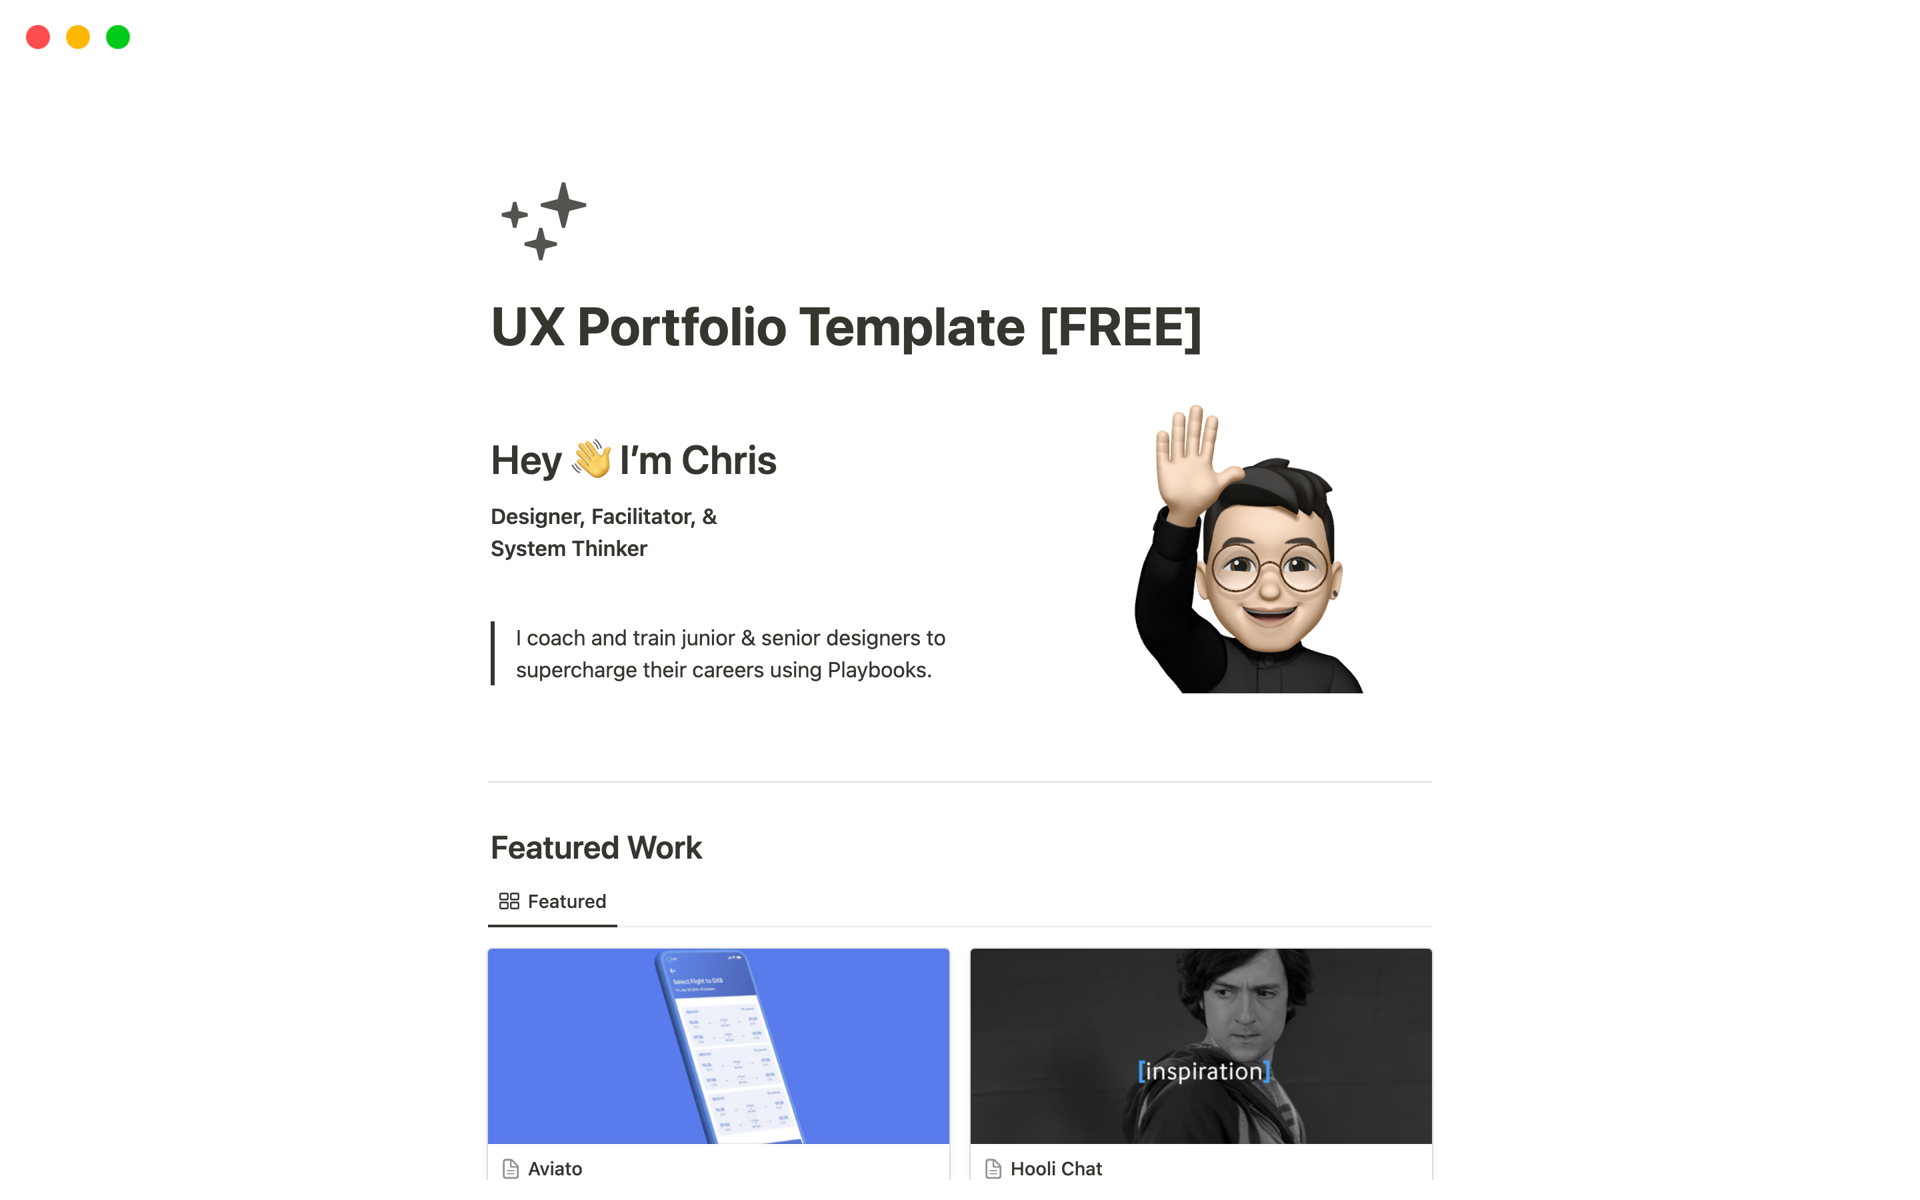 An easy-to-understand and visually compelling way to show your UX design work and personality.